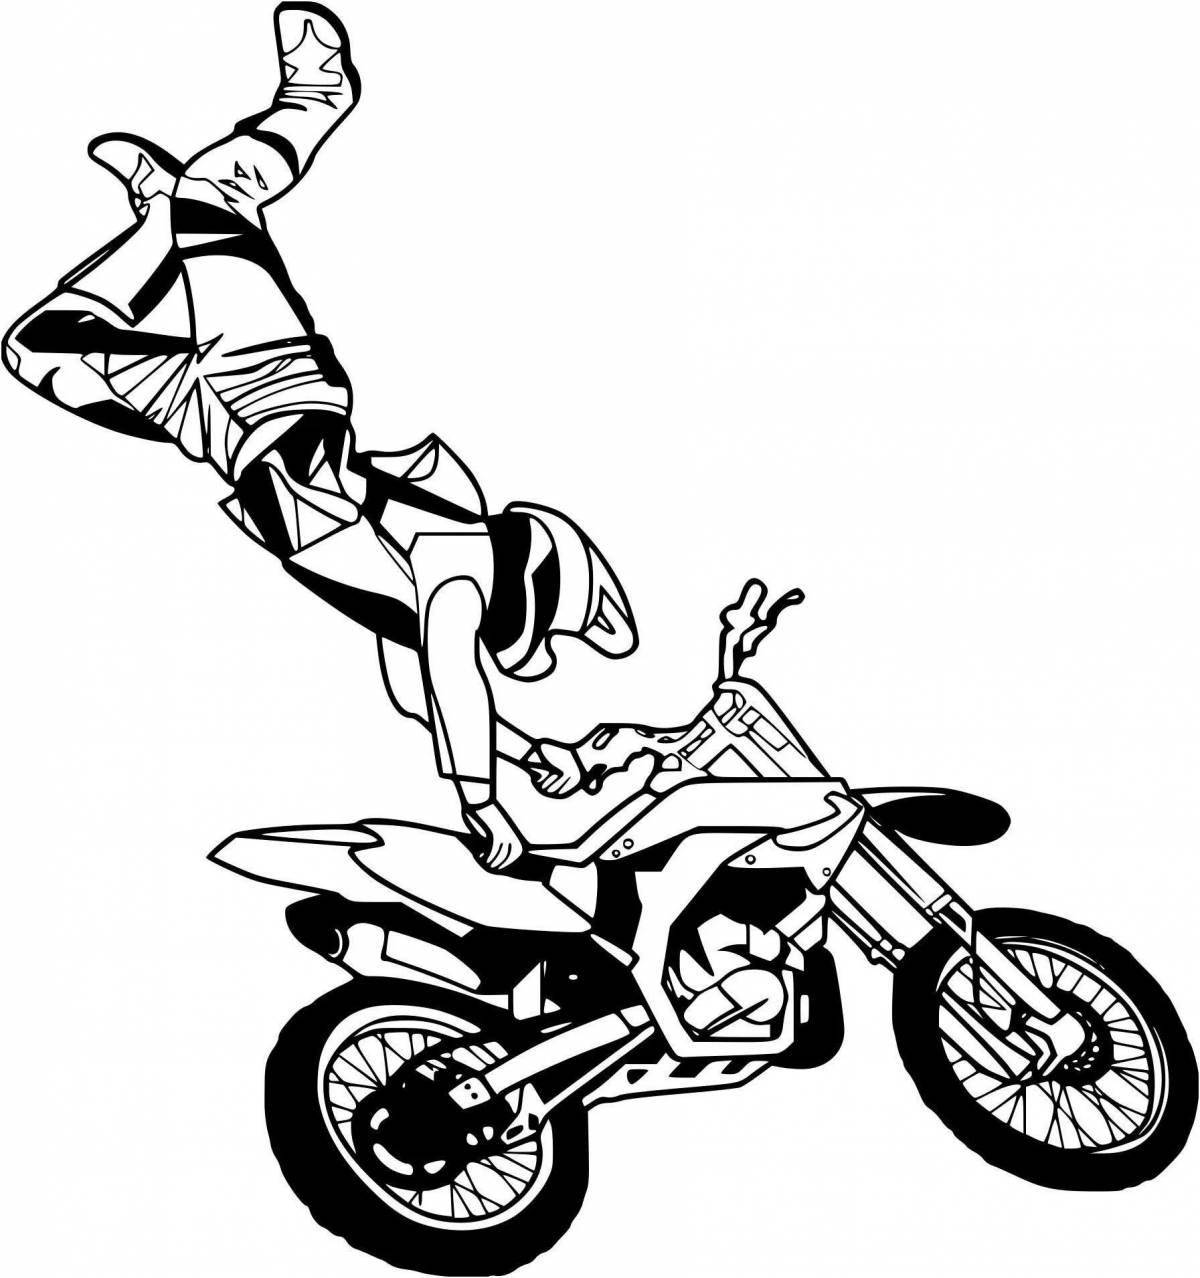 Courageous motorcyclist coloring page